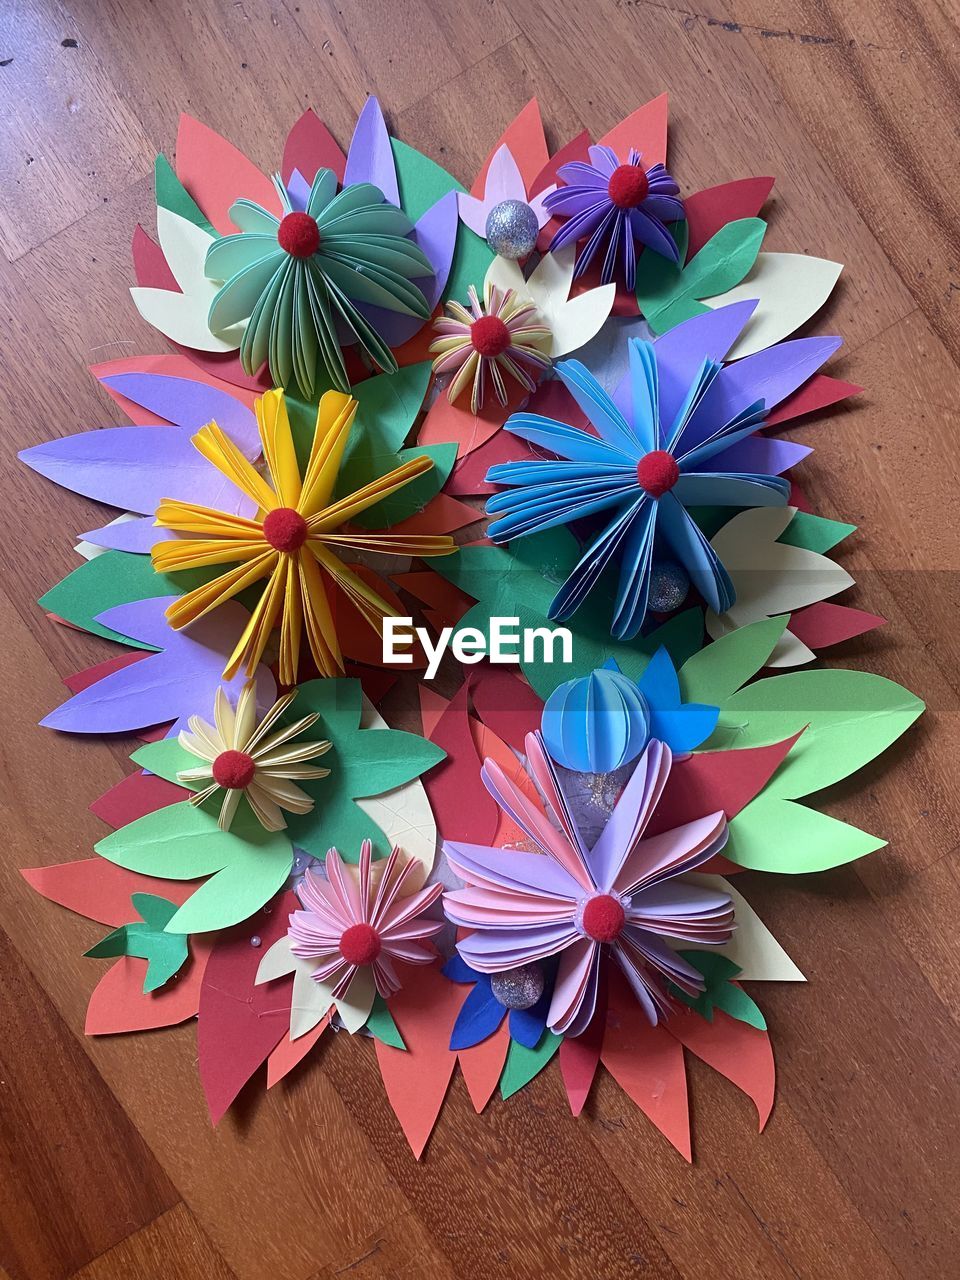 wheel, multi colored, origami paper, origami, art paper, high angle view, art, creativity, no people, paper, flower, wood, indoors, craft, table, petal, large group of objects, still life, variation, close-up, directly above, decoration, shape, pinwheel toy, blue